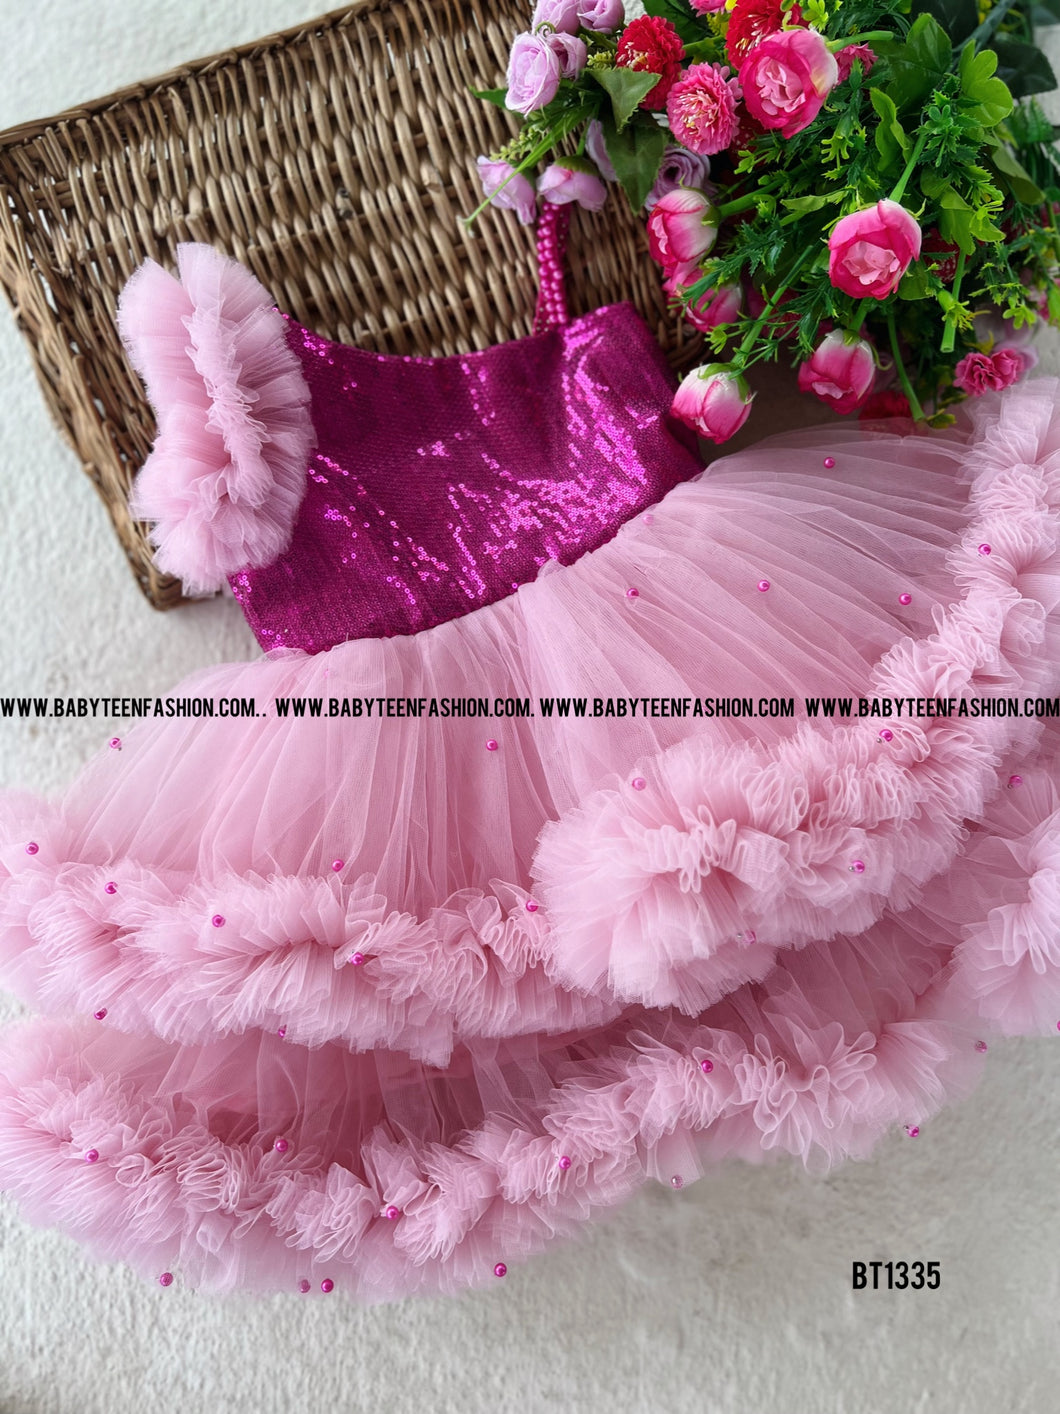 BT1335 Rosy Sequin Delight Dress - A Celebration of Pink Perfection!